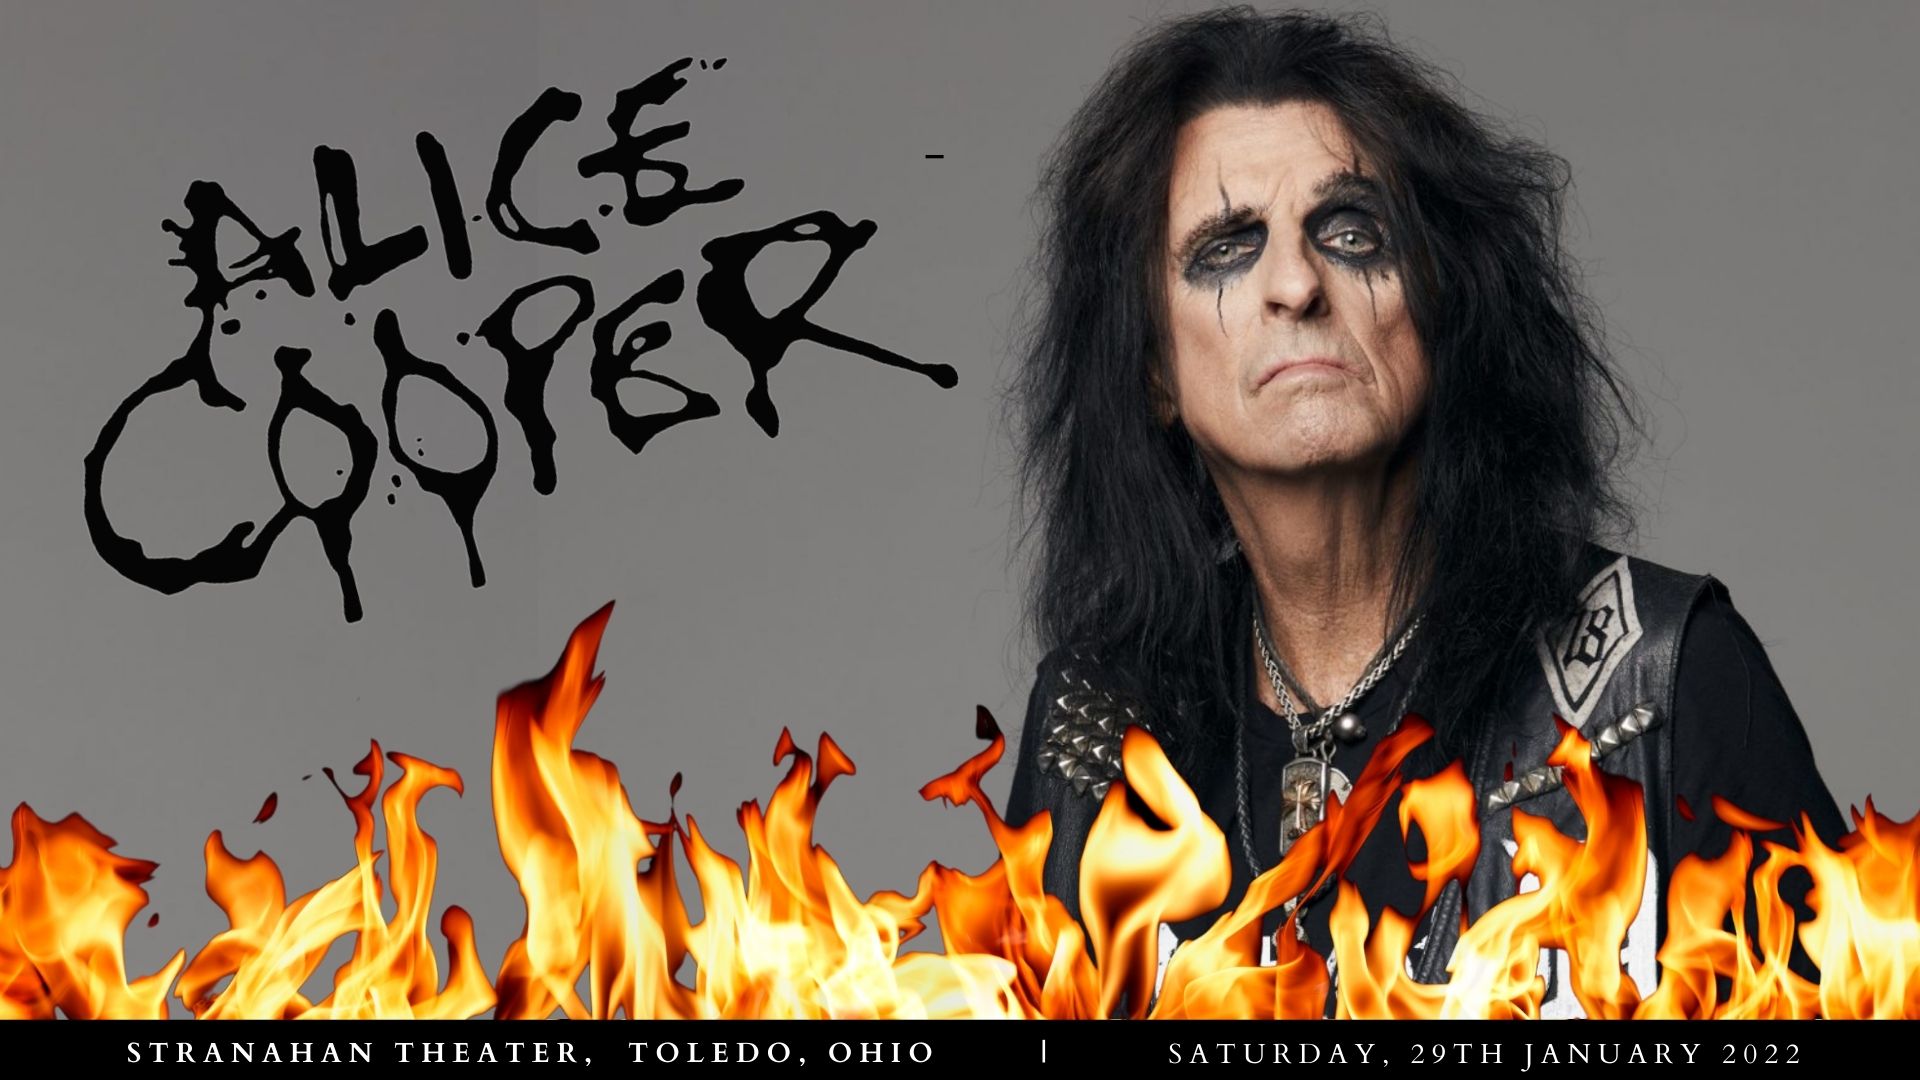 Alice Cooper at Stranahan Theater